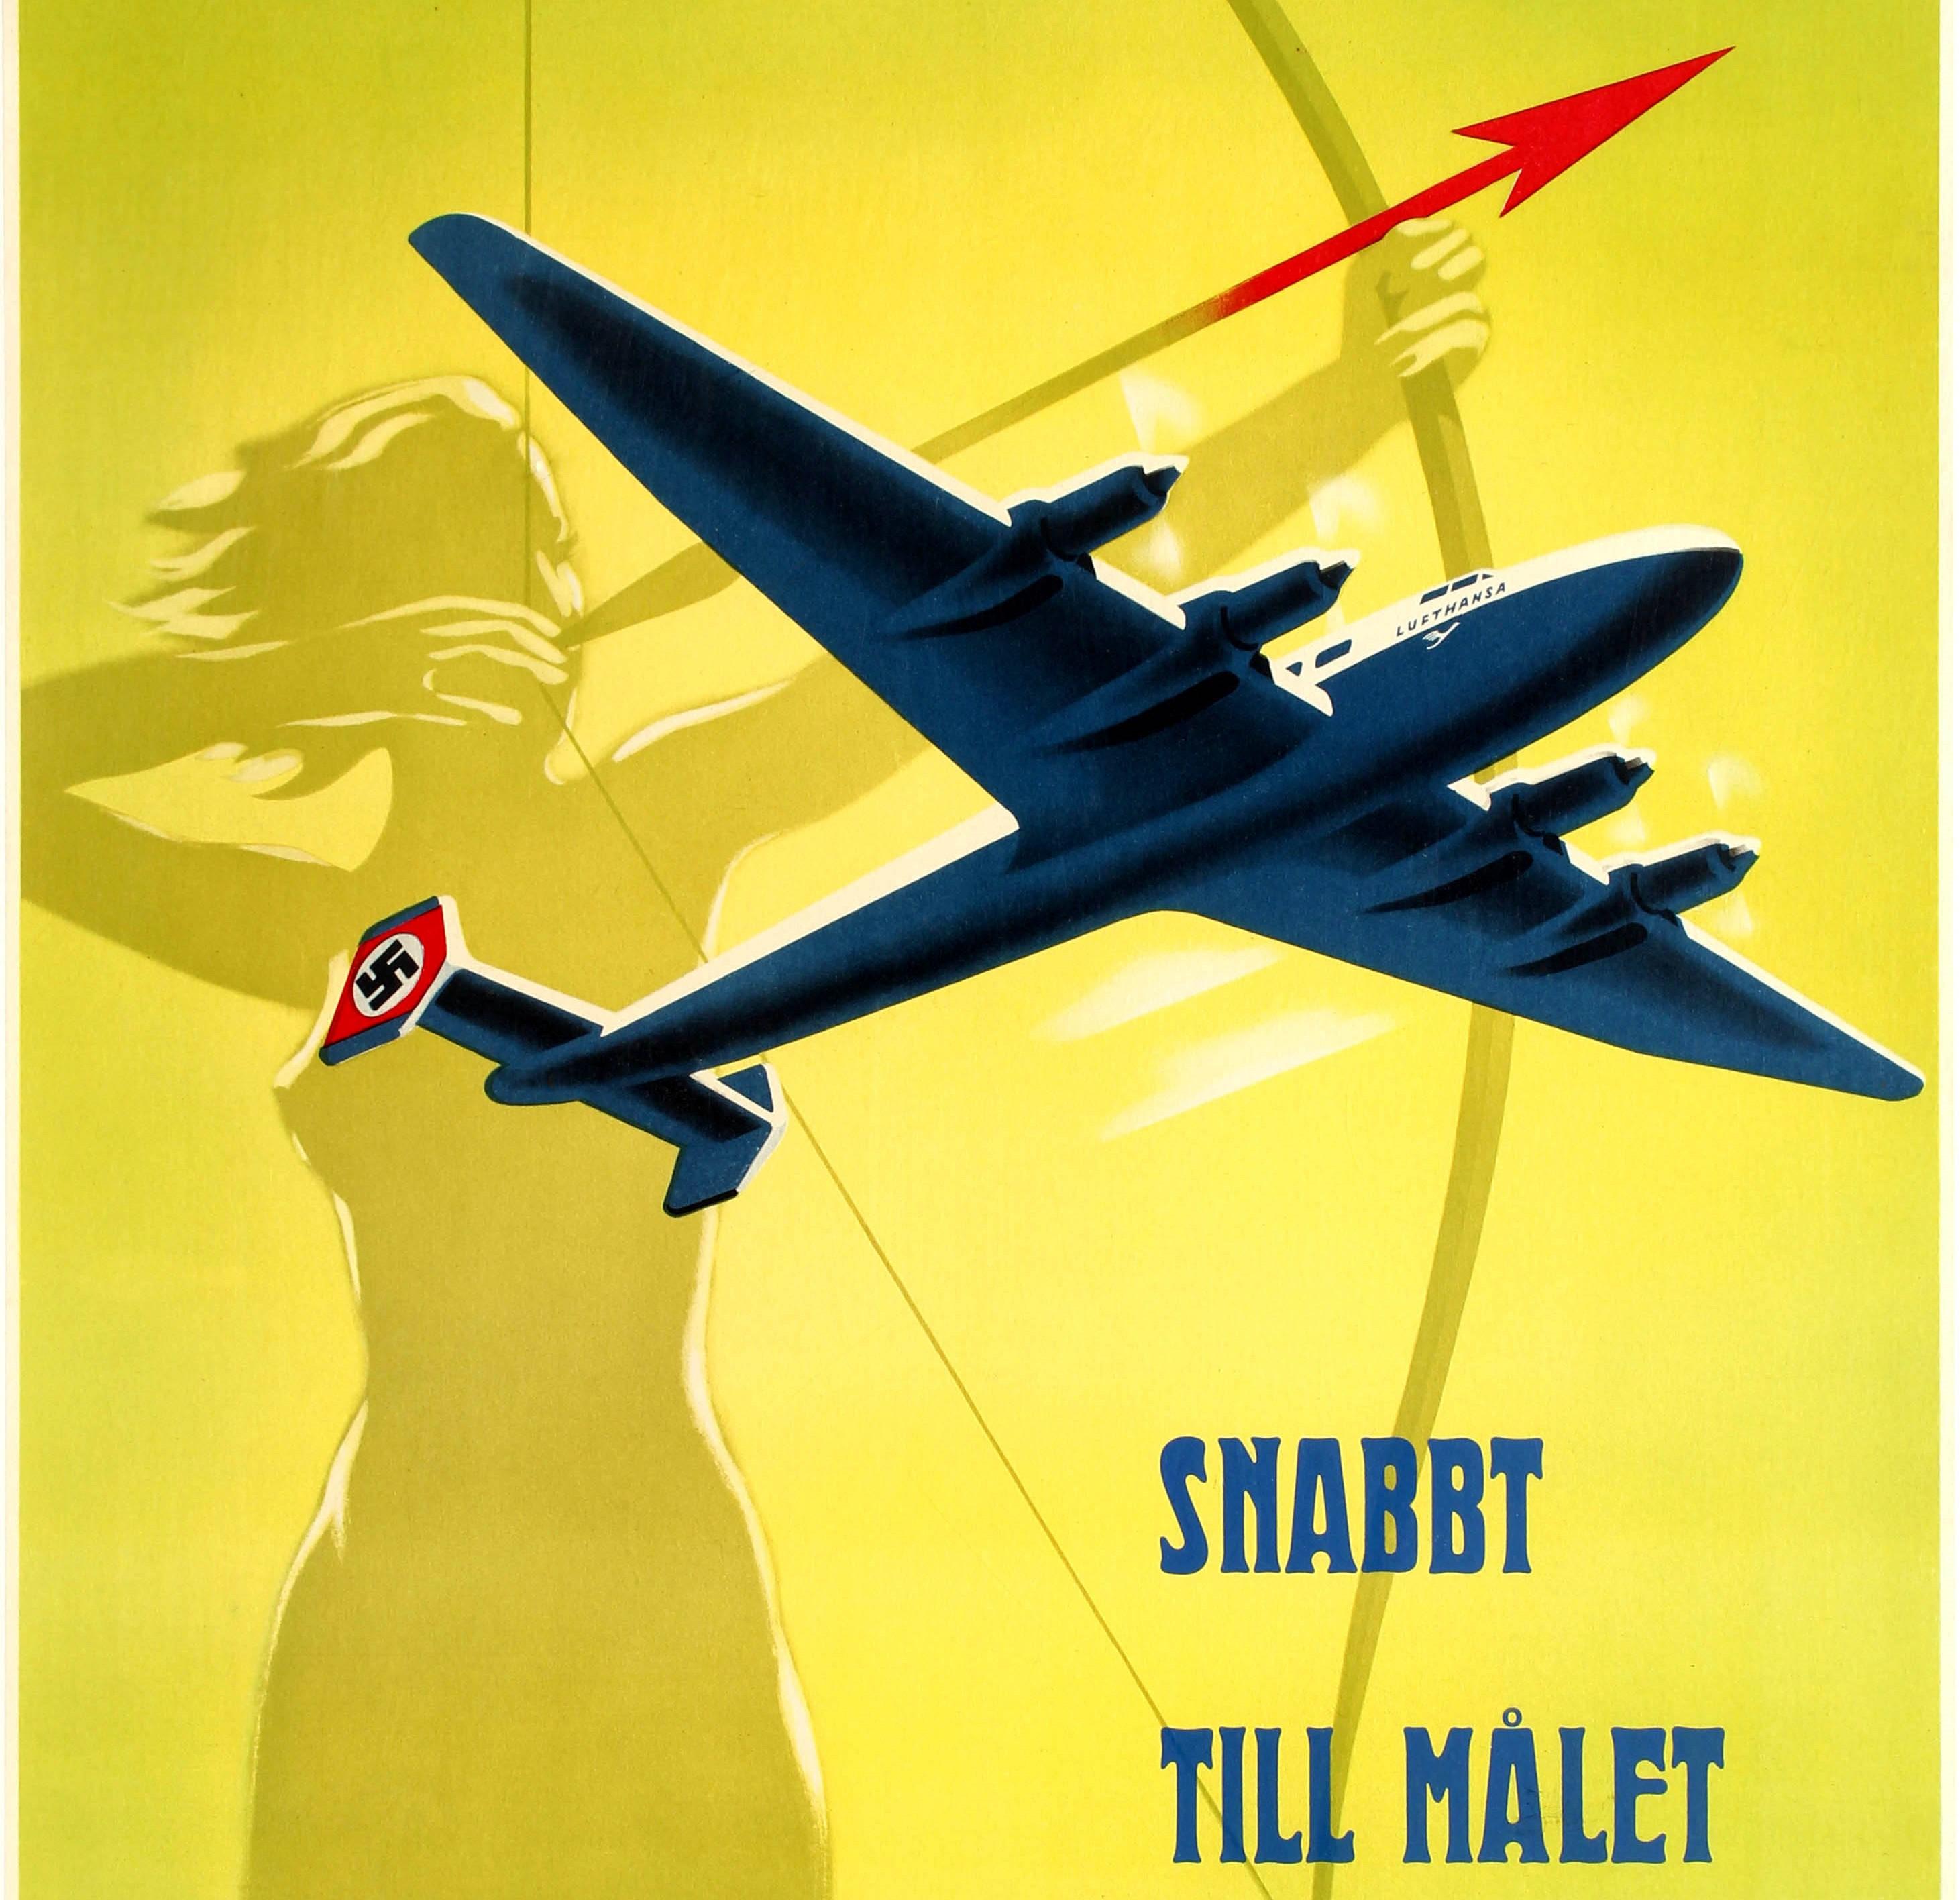 malet airline